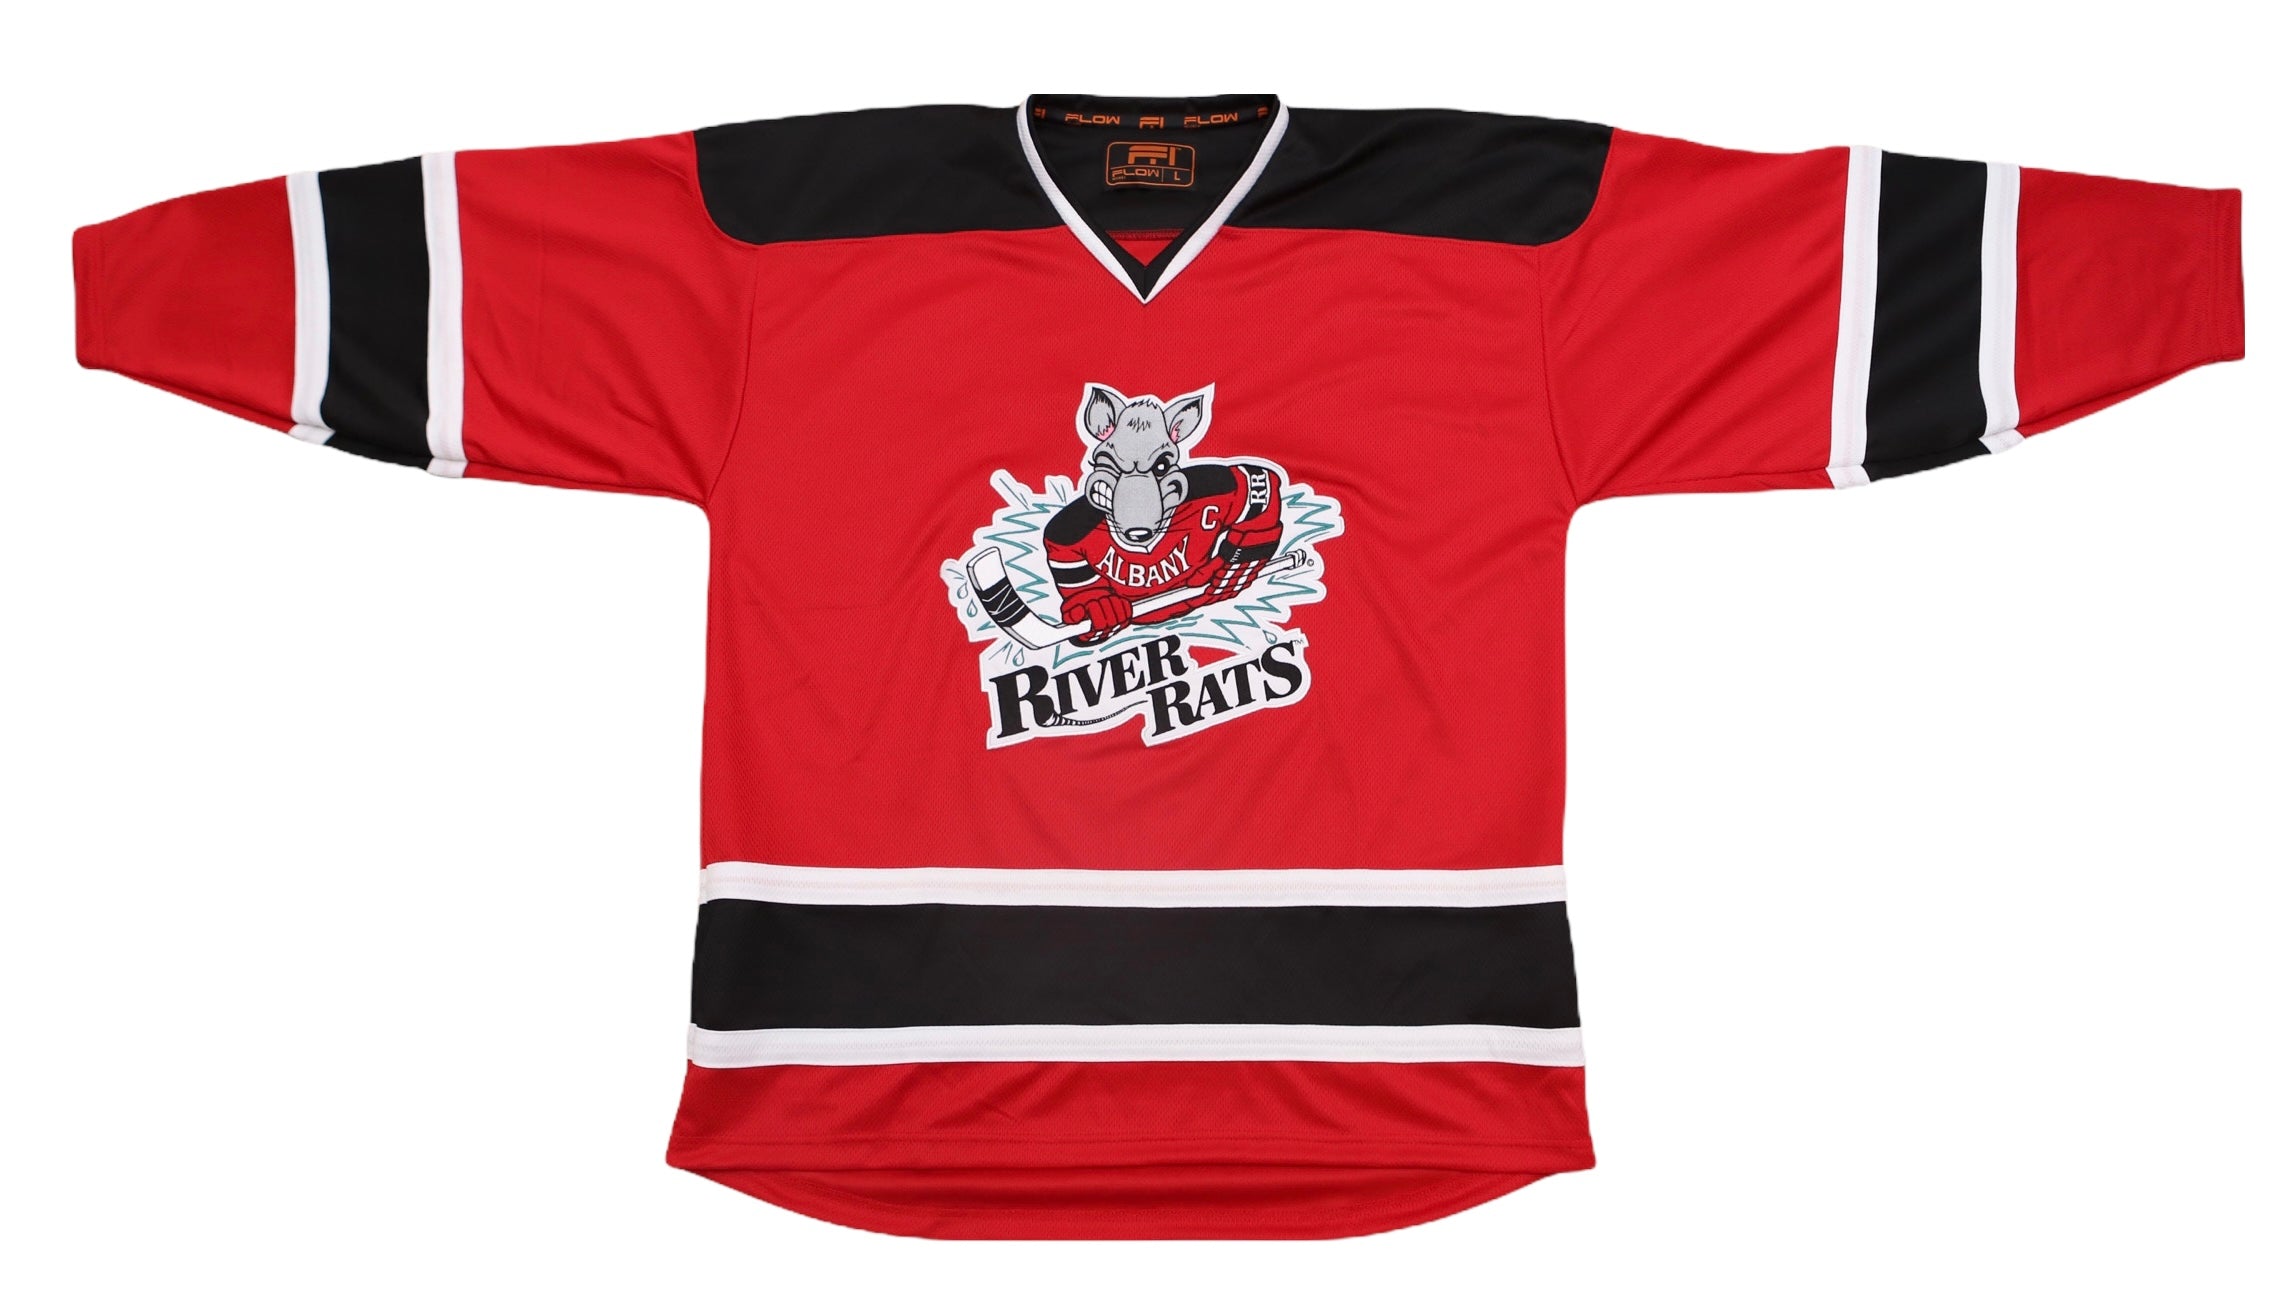 5 bizarre and fake NHL designs showing up on knock-off jersey